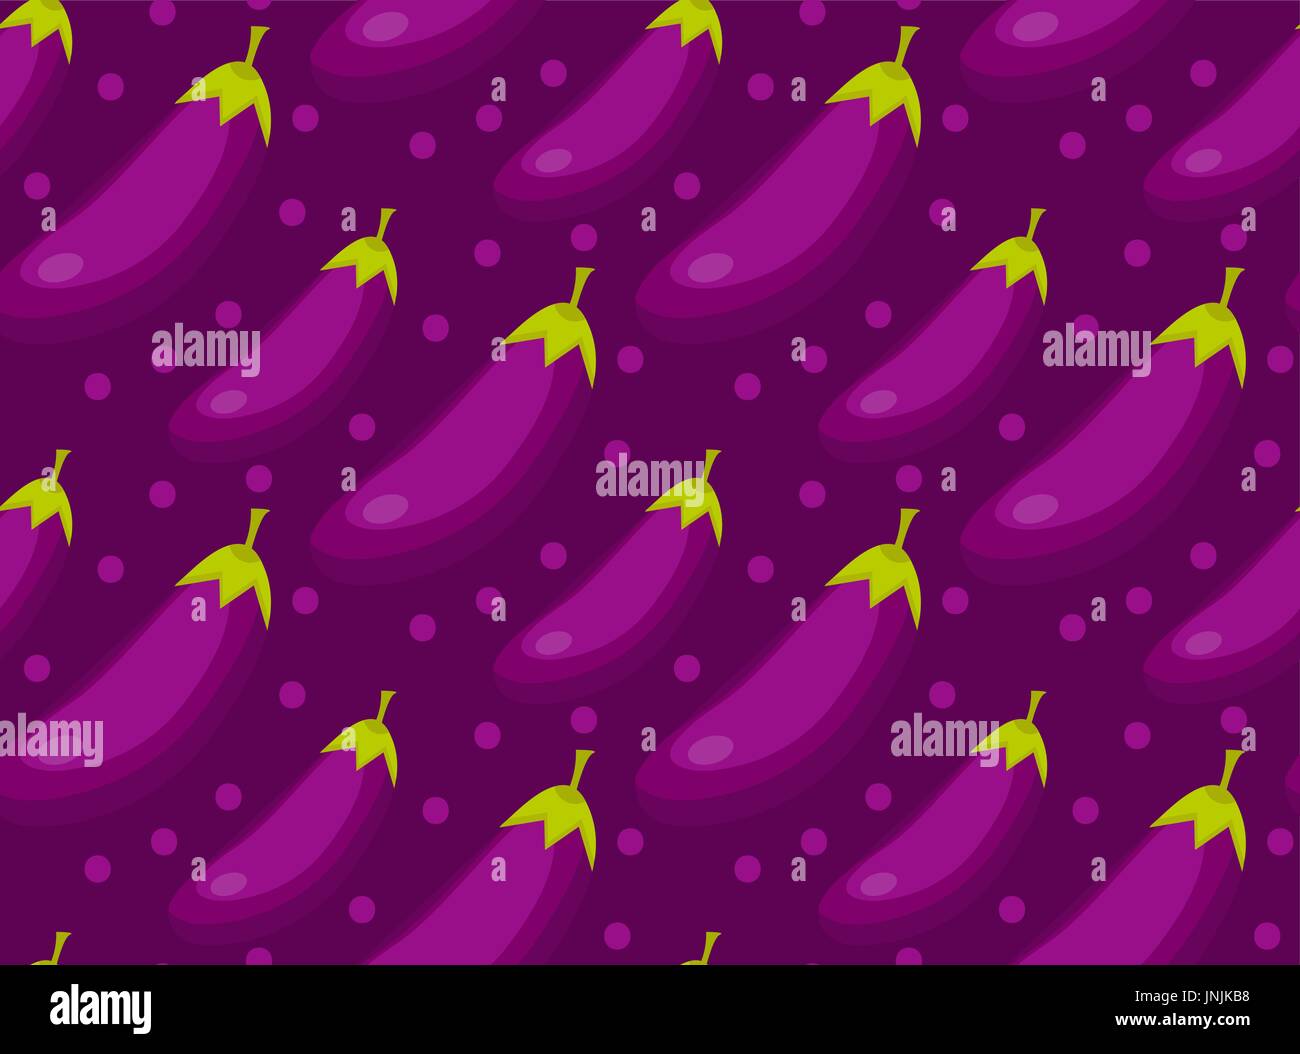 94473 Leaves Eggplant Images Stock Photos  Vectors  Shutterstock